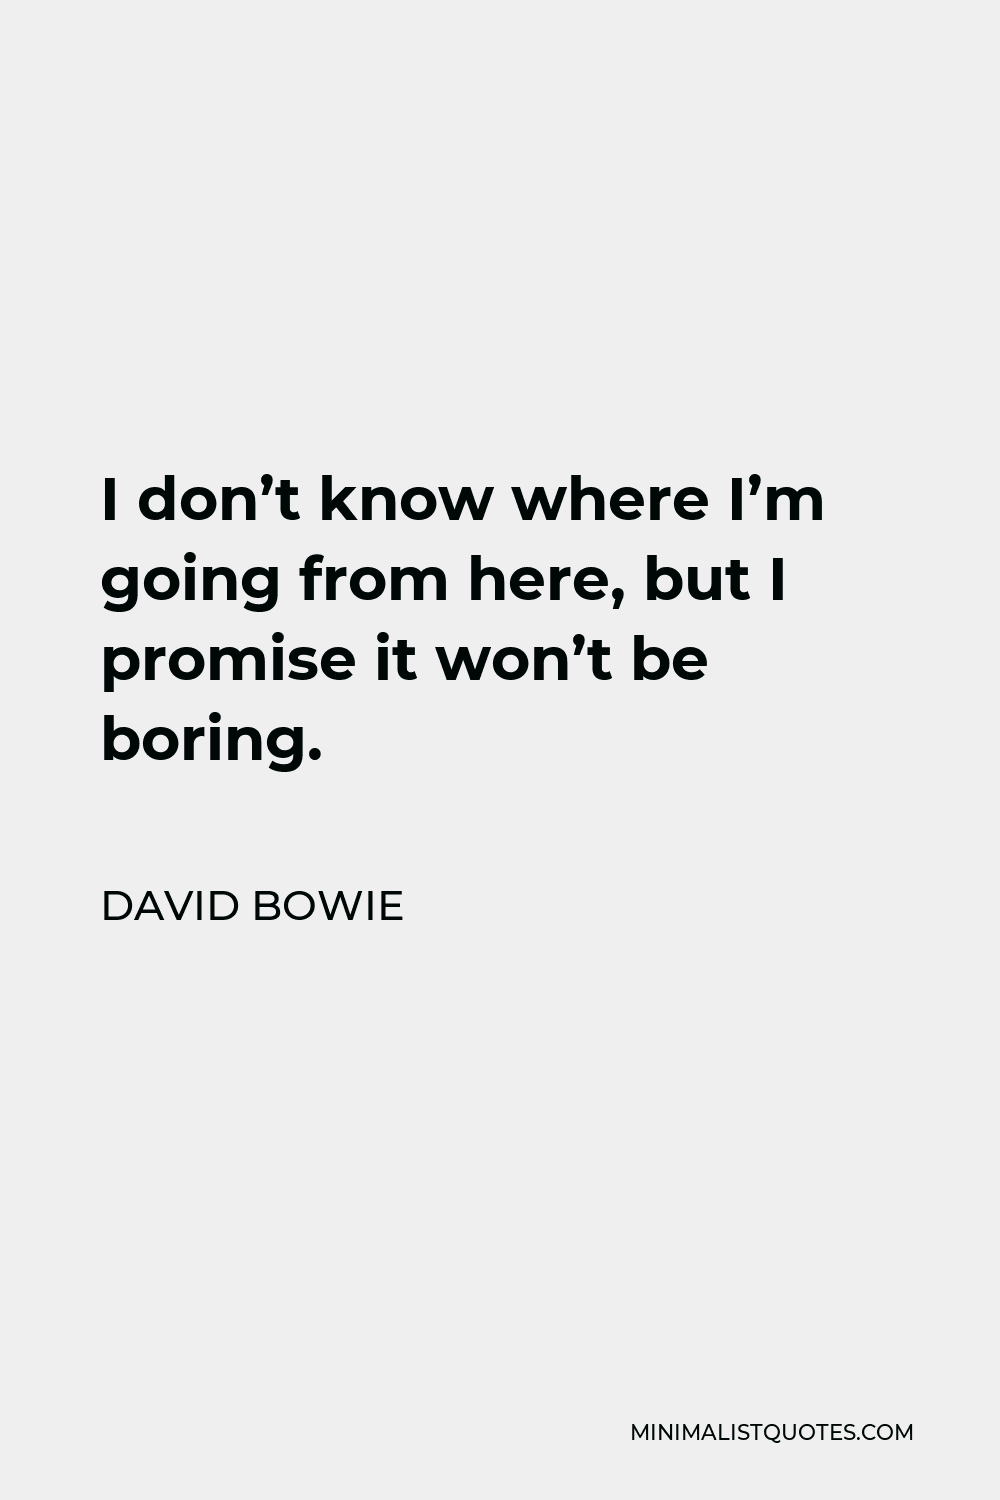 David Bowie Quote - I don’t know where I’m going from here, but I promise it won’t be boring.